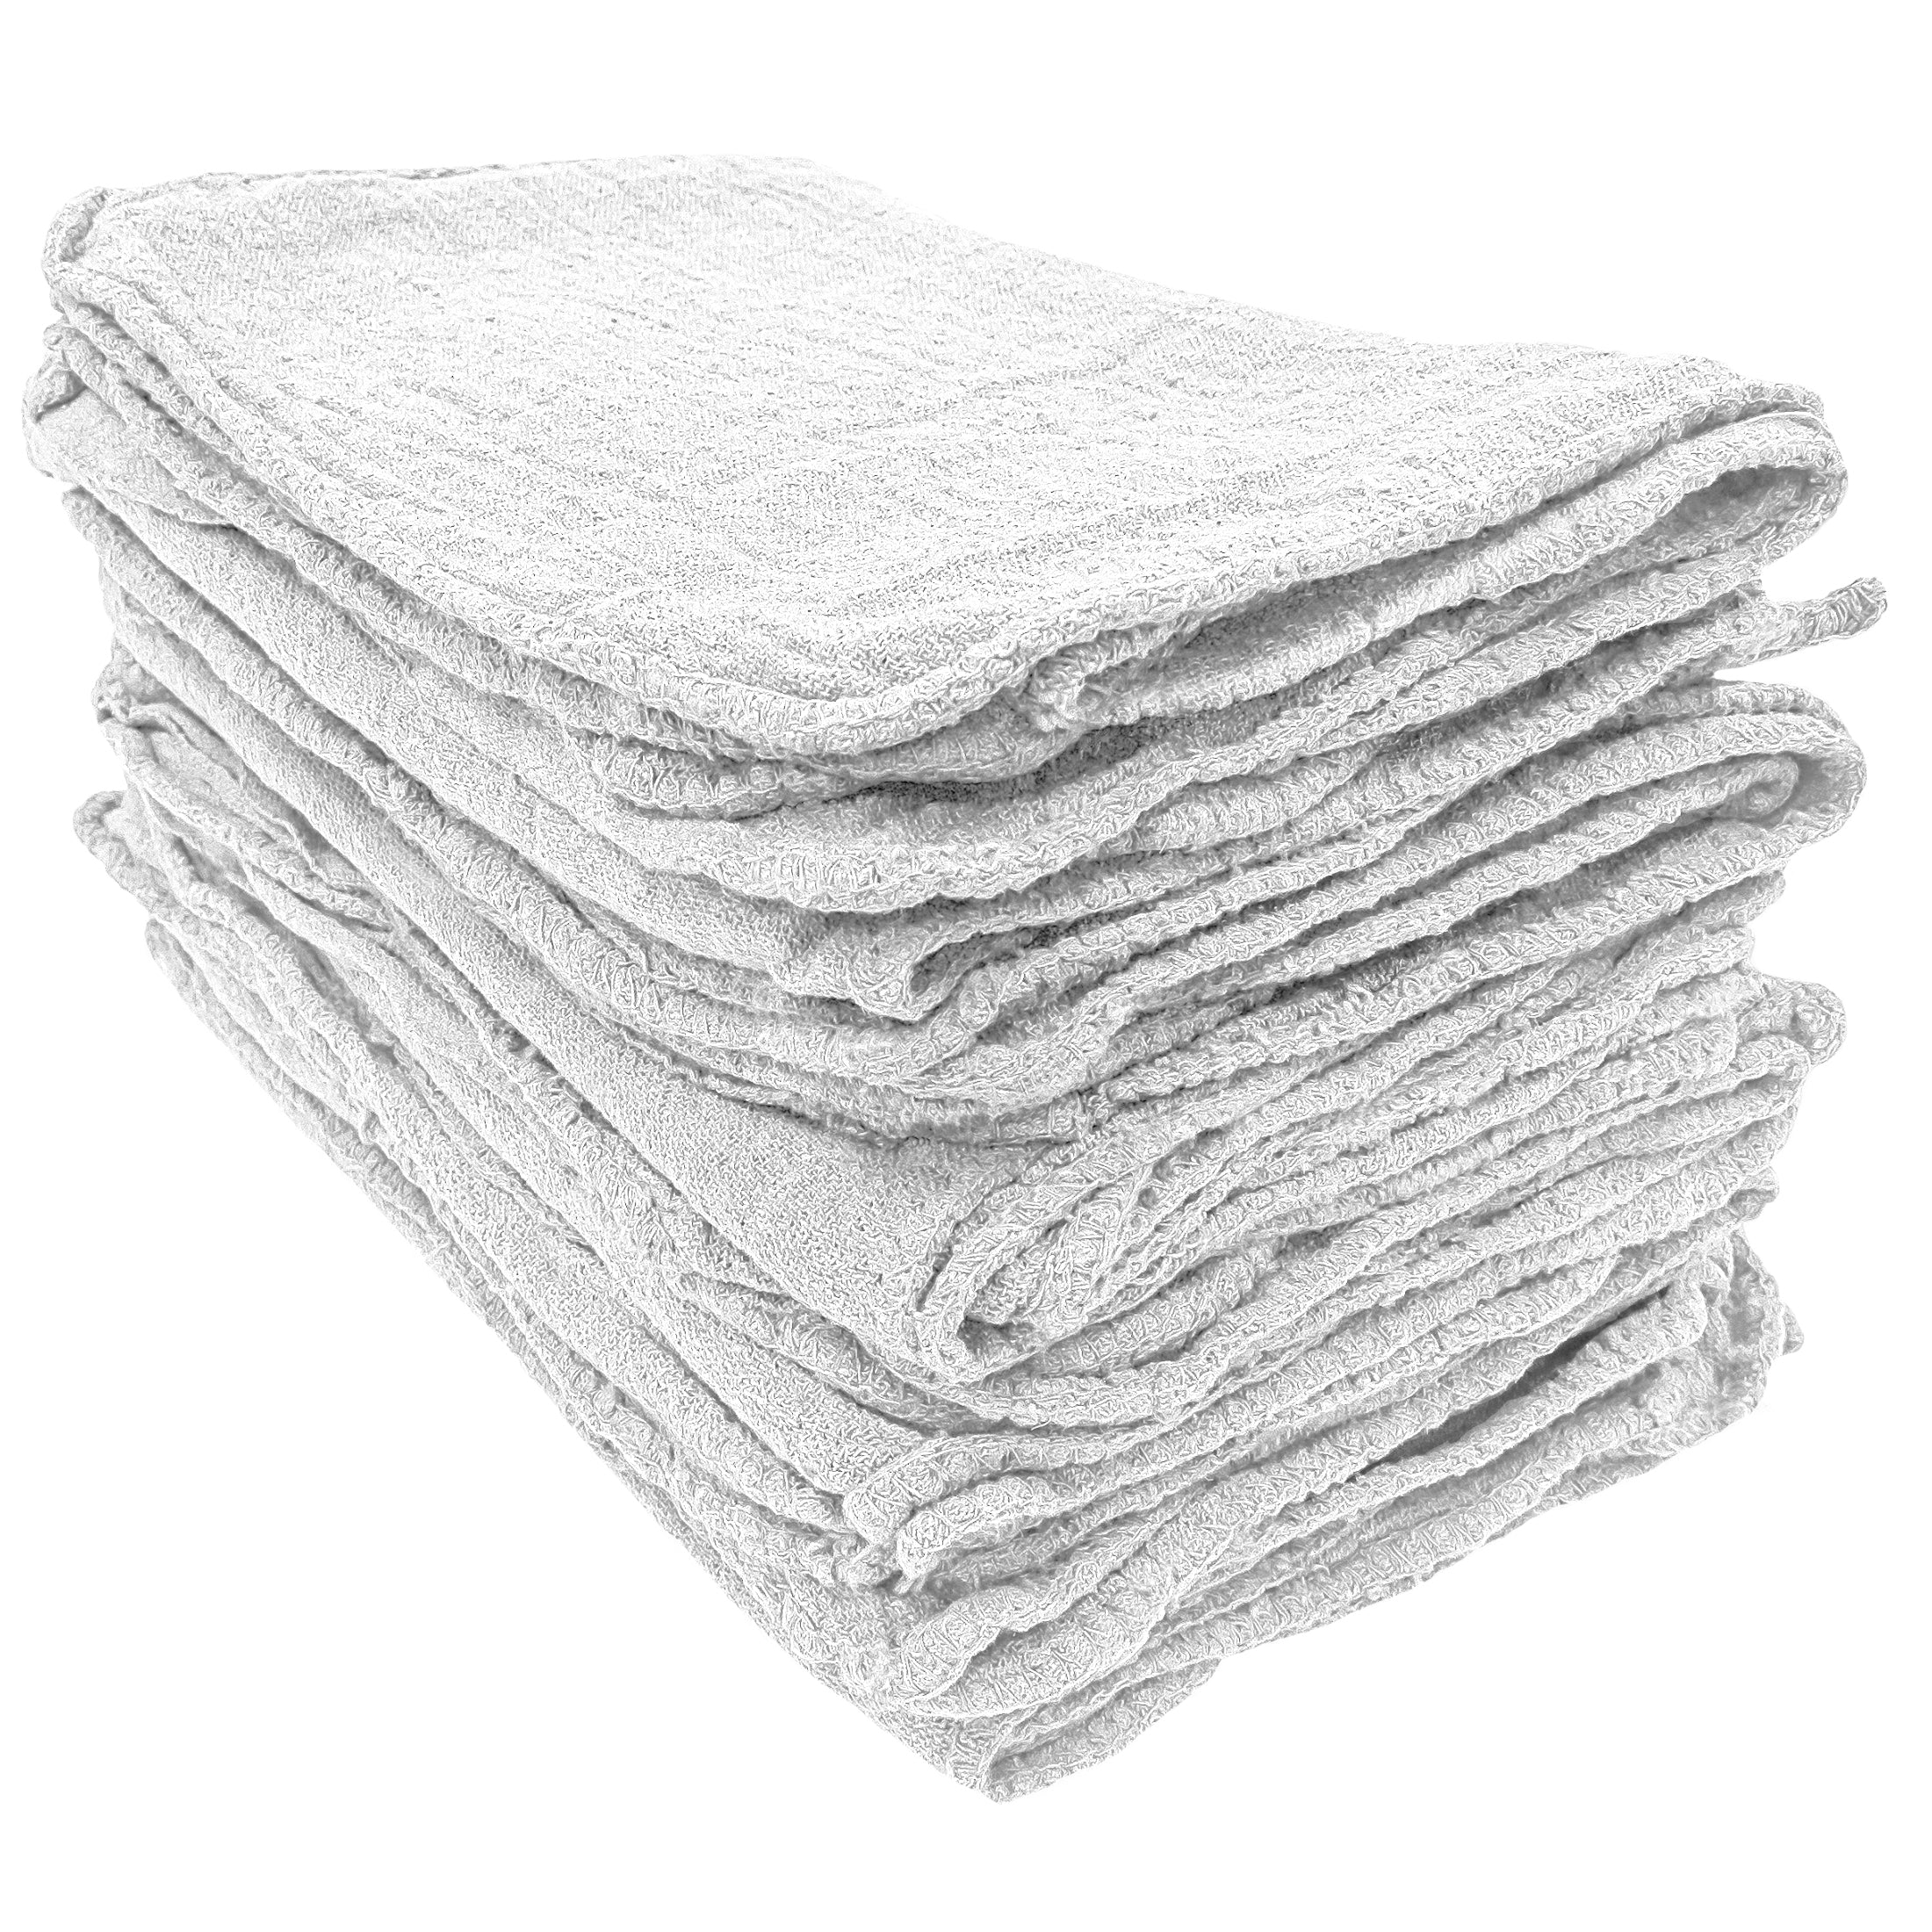 White Shop Towels 12 x 12 Cleaning Rags Homes Cars Reusable Cotton Wash  Cloth